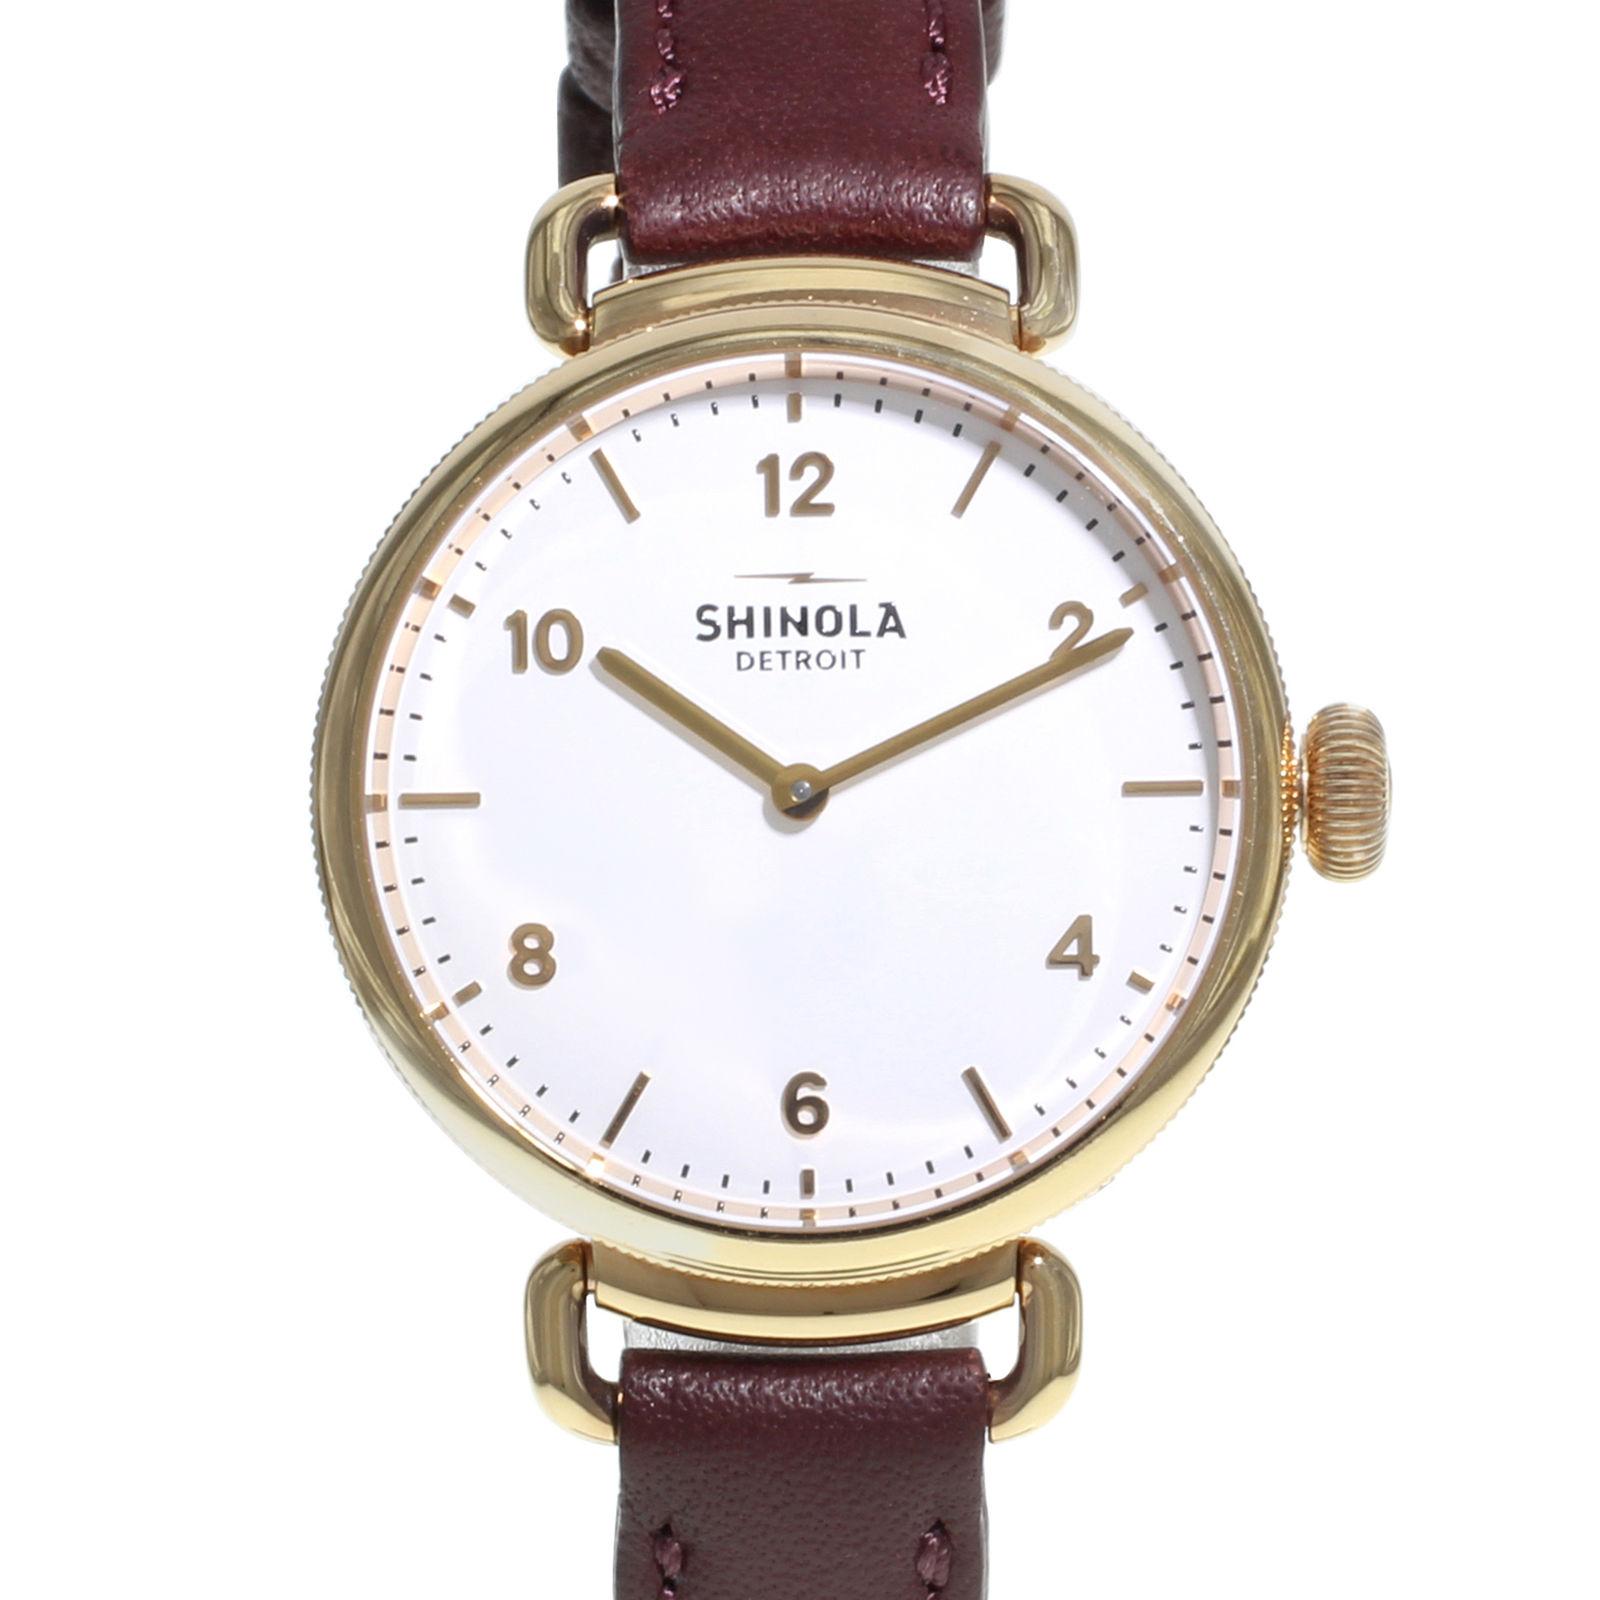 (20729)
This pre-owned Shinola The Canfield 20018133 is a beautiful Ladies timepiece that is powered by a quartz movement which is cased in a stainless steel case. It has a round shape face, no features dial and has hand sticks & numerals style